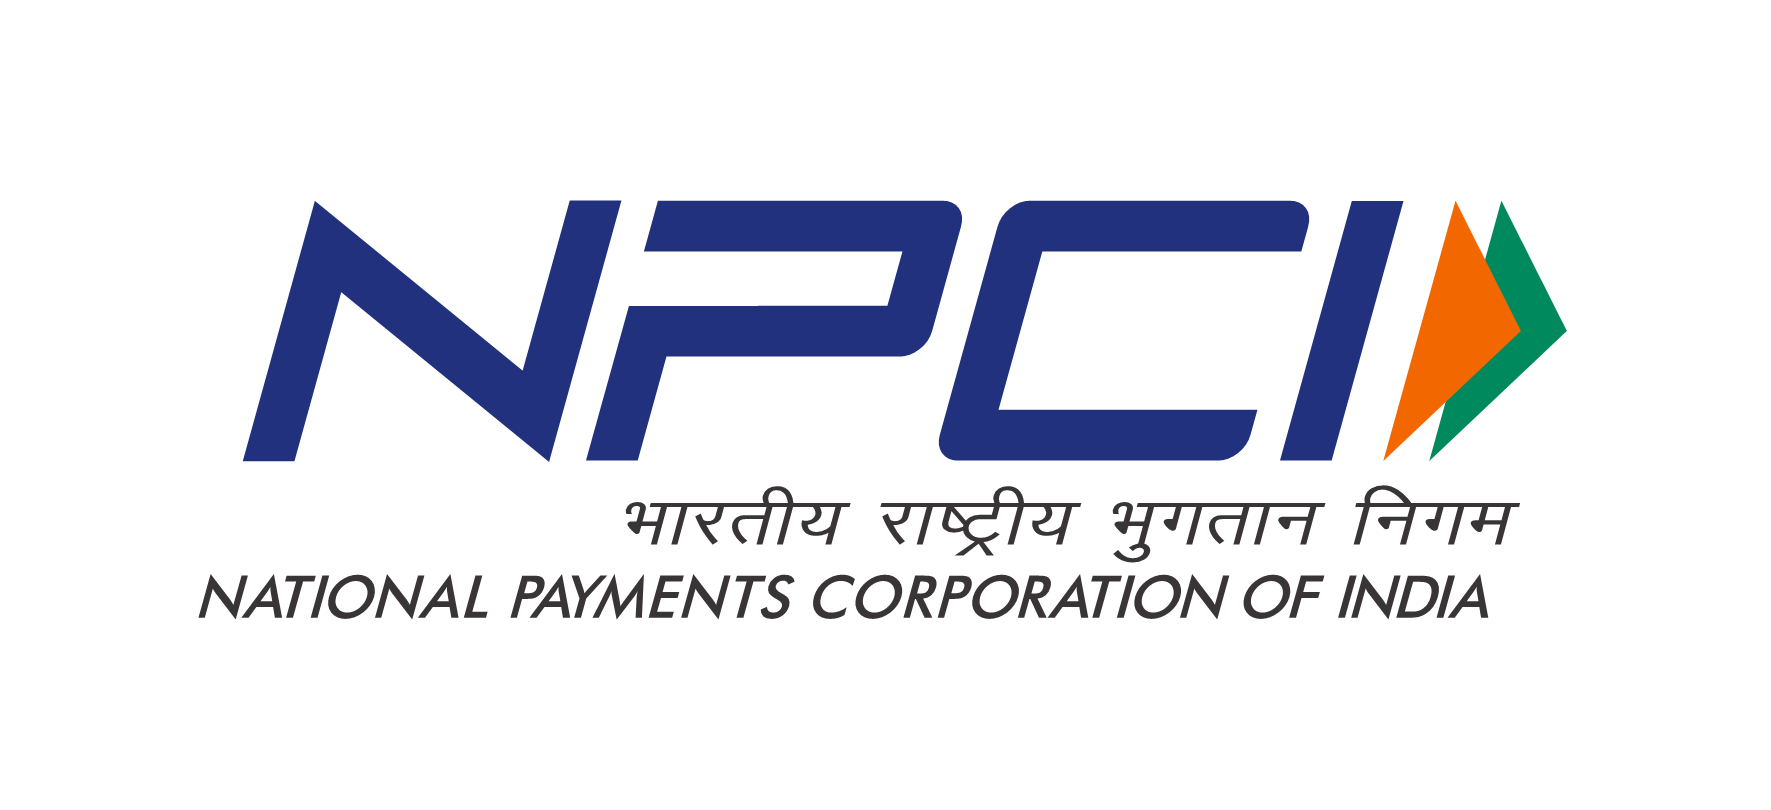 jcb-partners-with-npci-to-offer-40-cashback-for-rupay-jcb-cardholders-for-in-store-purchases-in-australia-qatar-and-uae